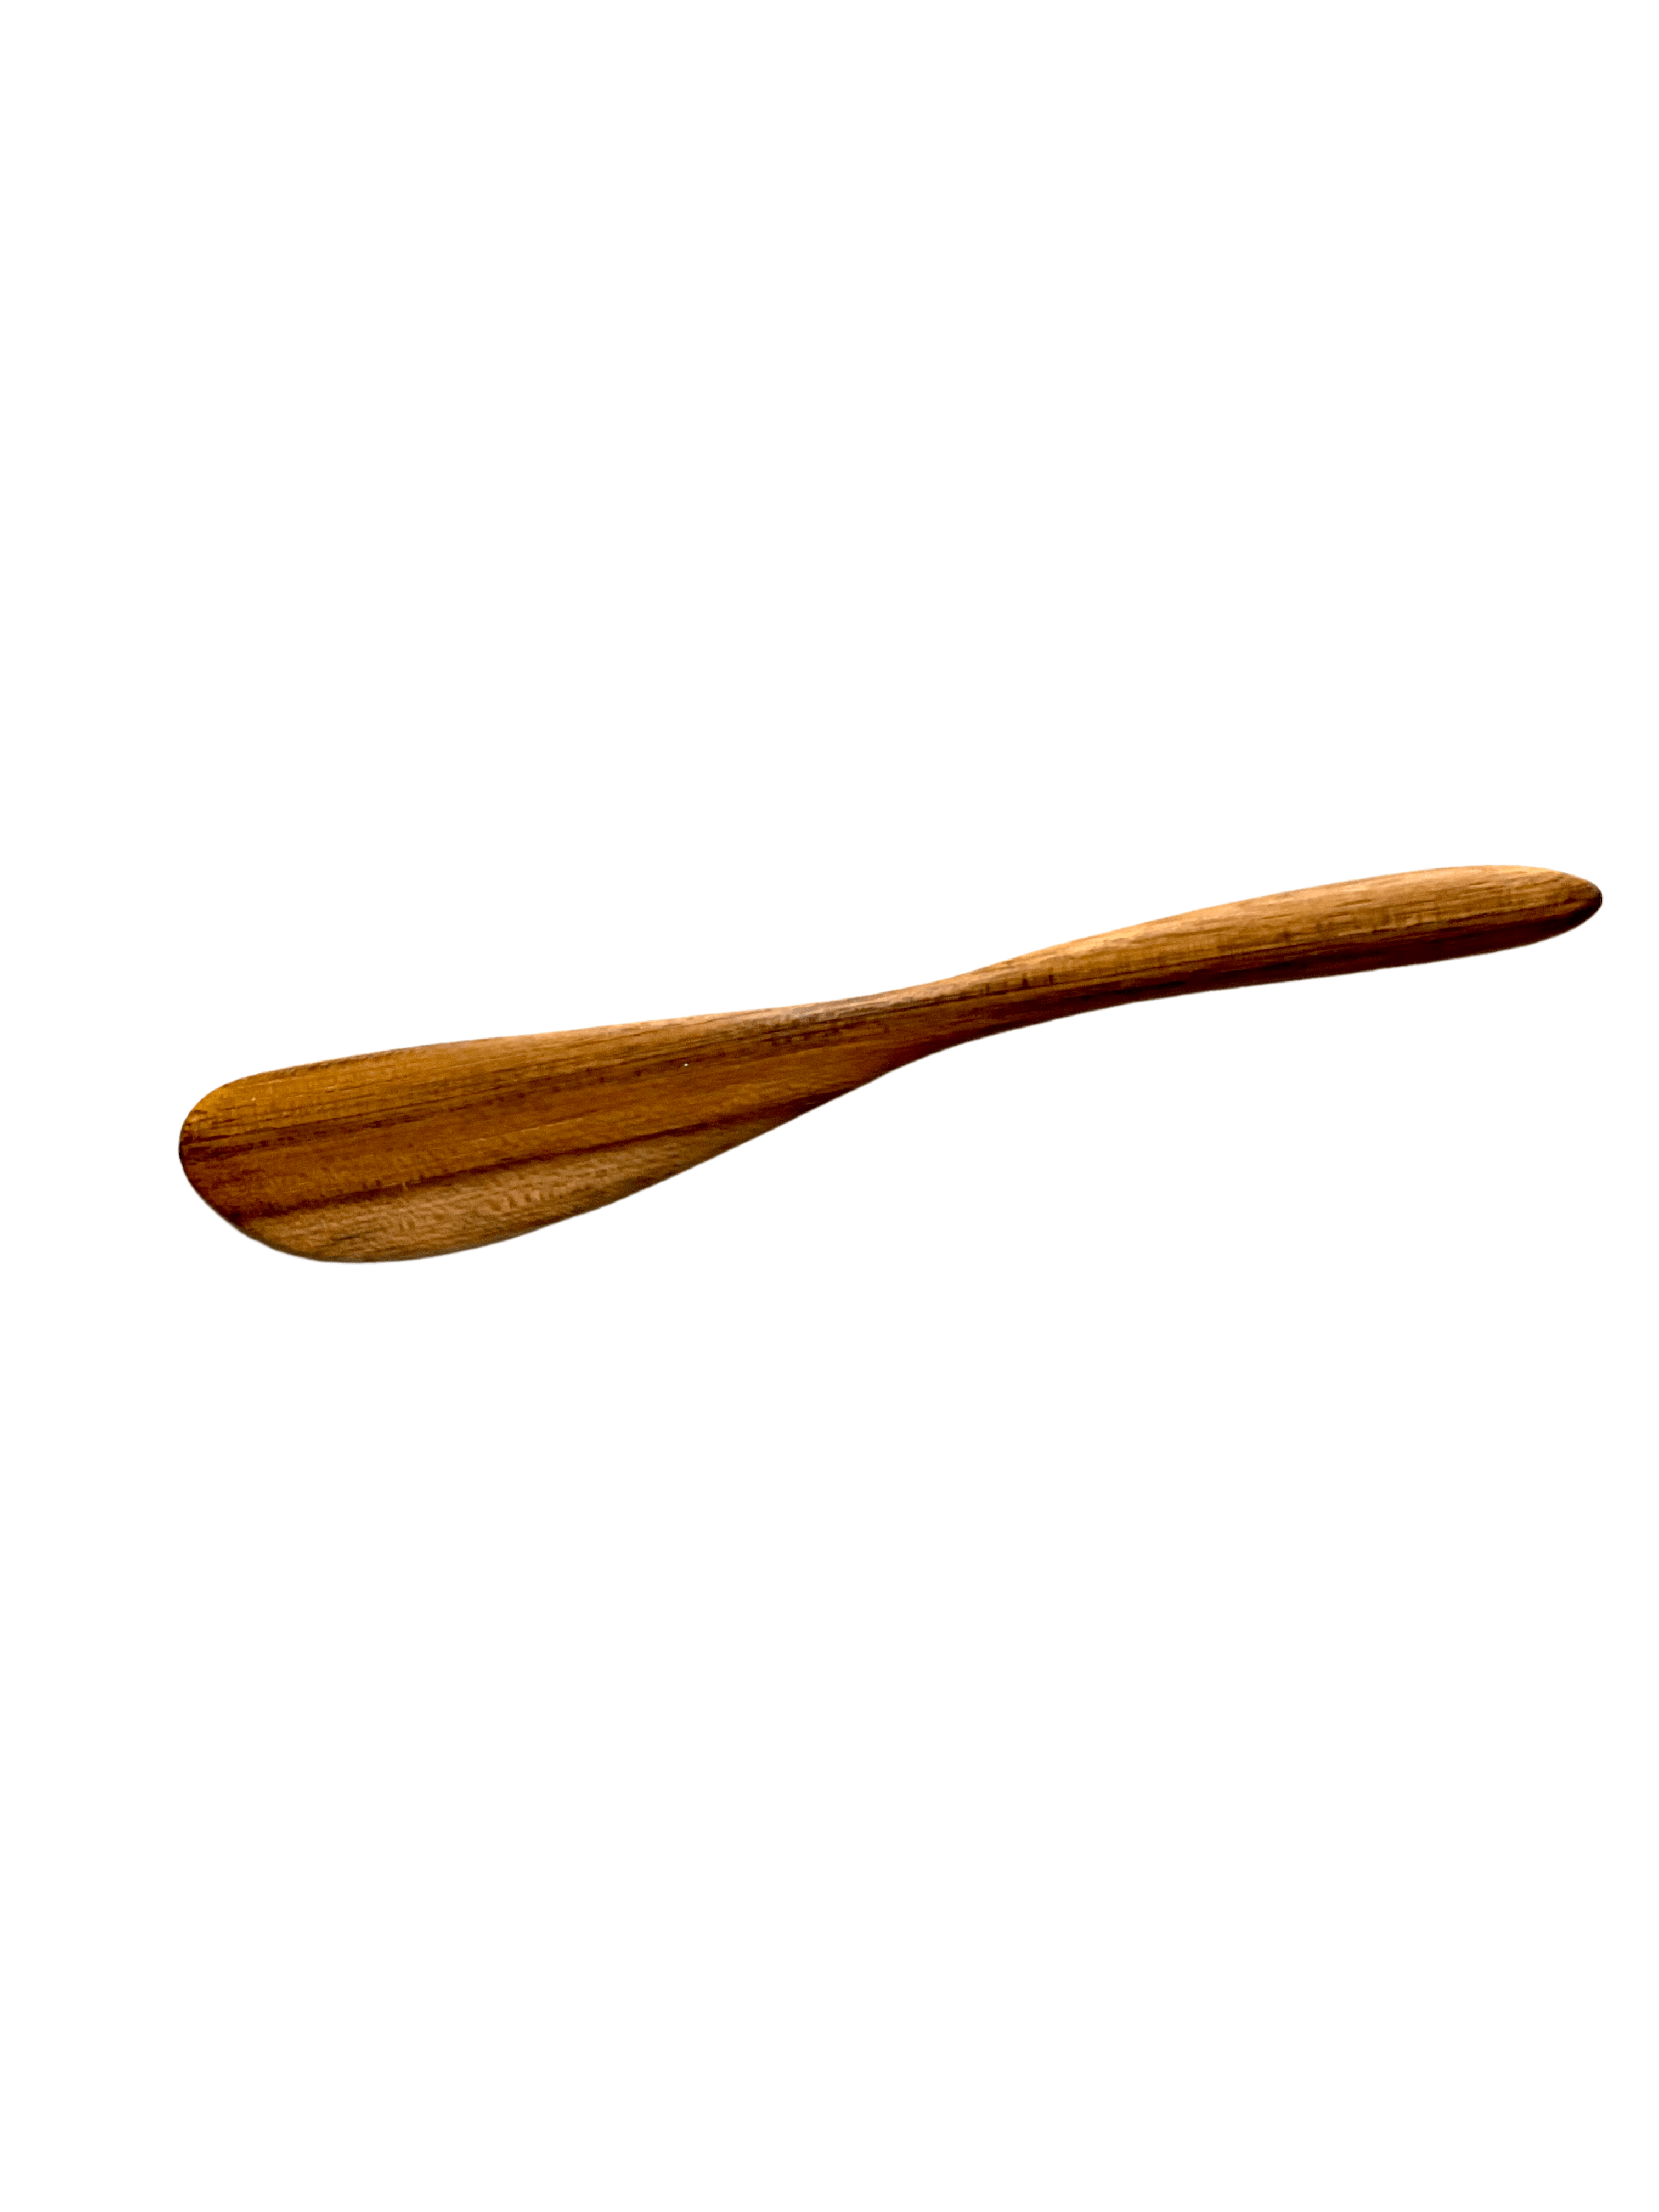 Buy Pistachio Butter Knife - Seed & Shell